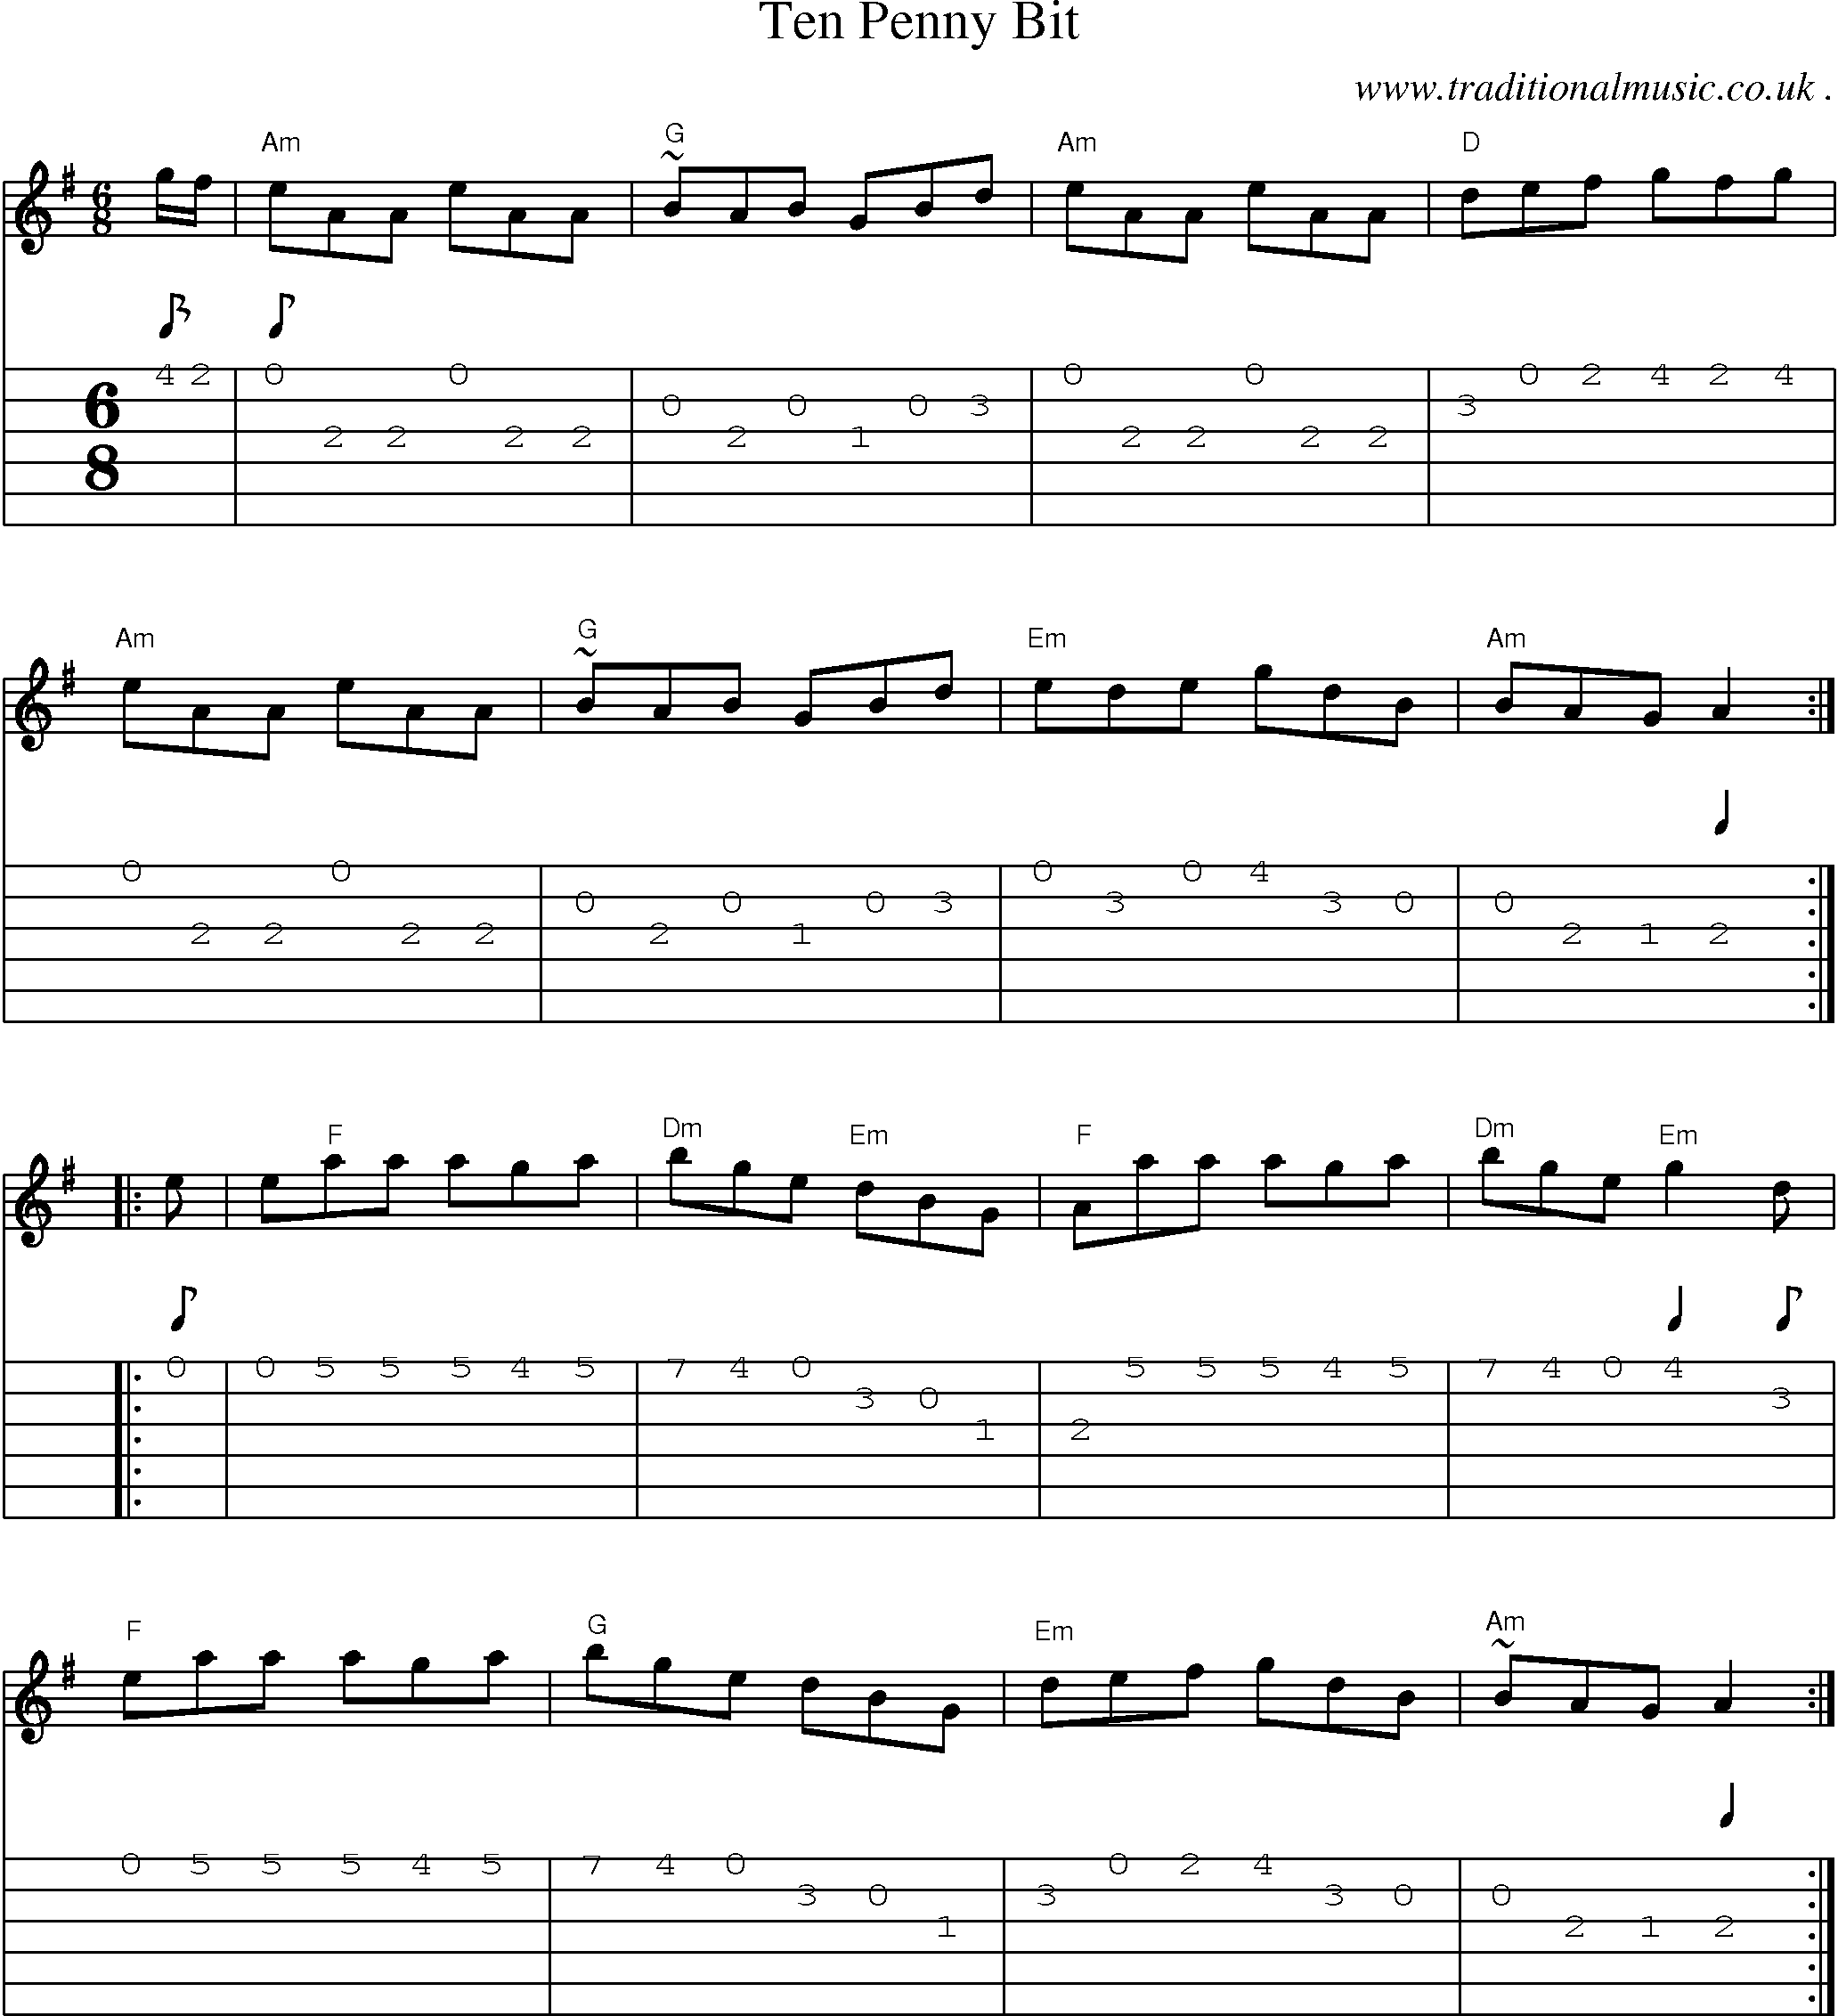 Music Score and Guitar Tabs for Ten Penny Bit